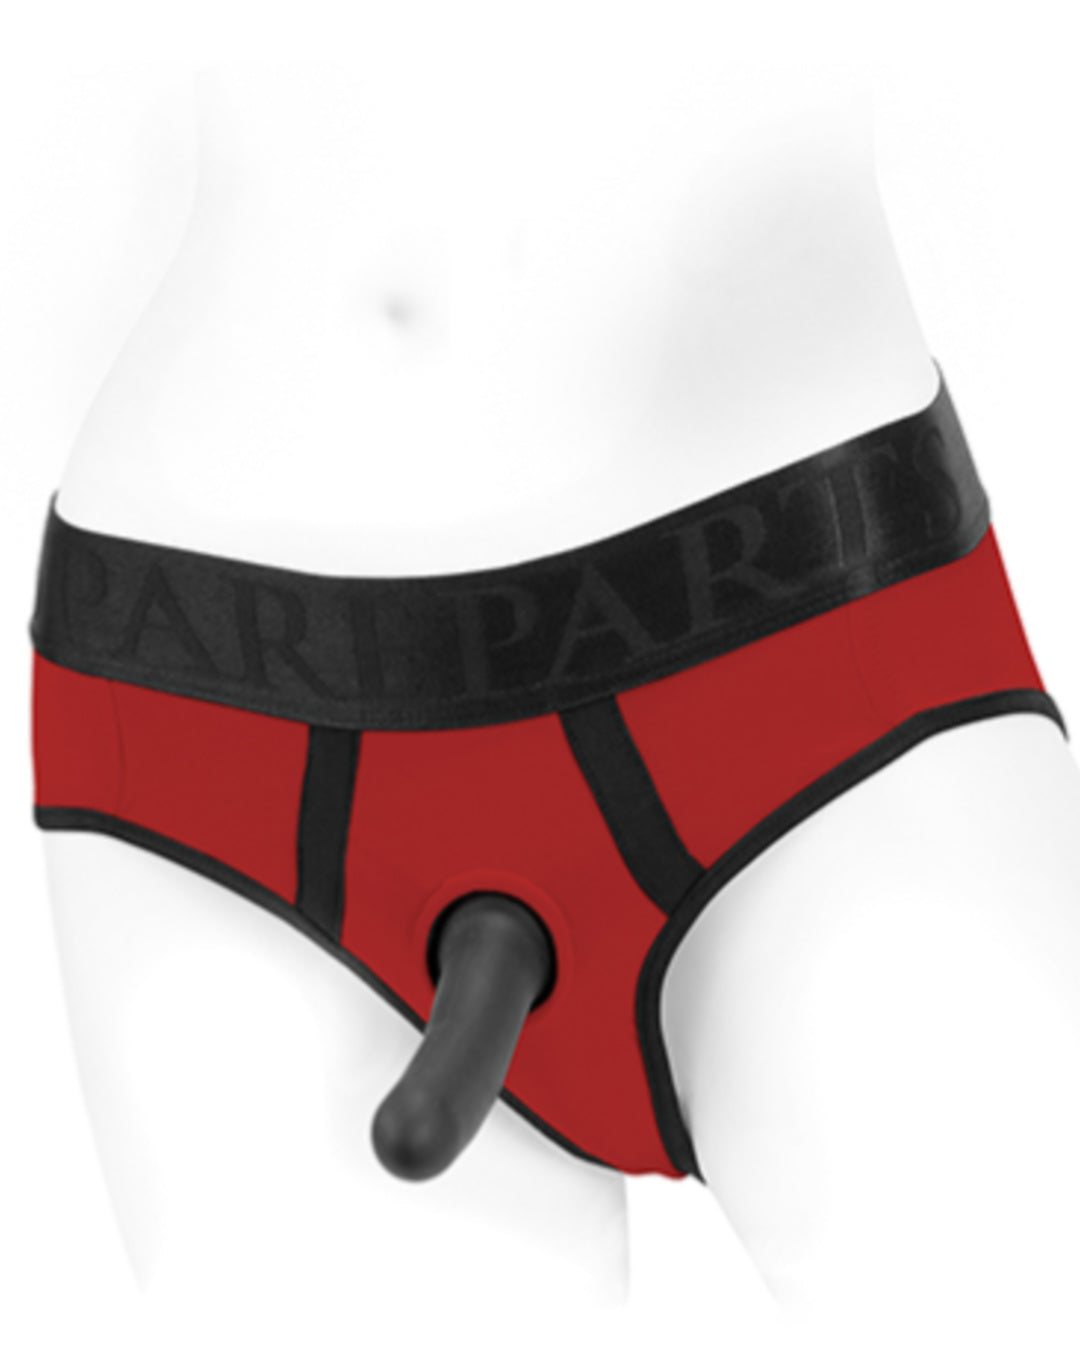 SpareParts Tomboi Plus Size Black Strap-on Harness Briefs (up to 5x)